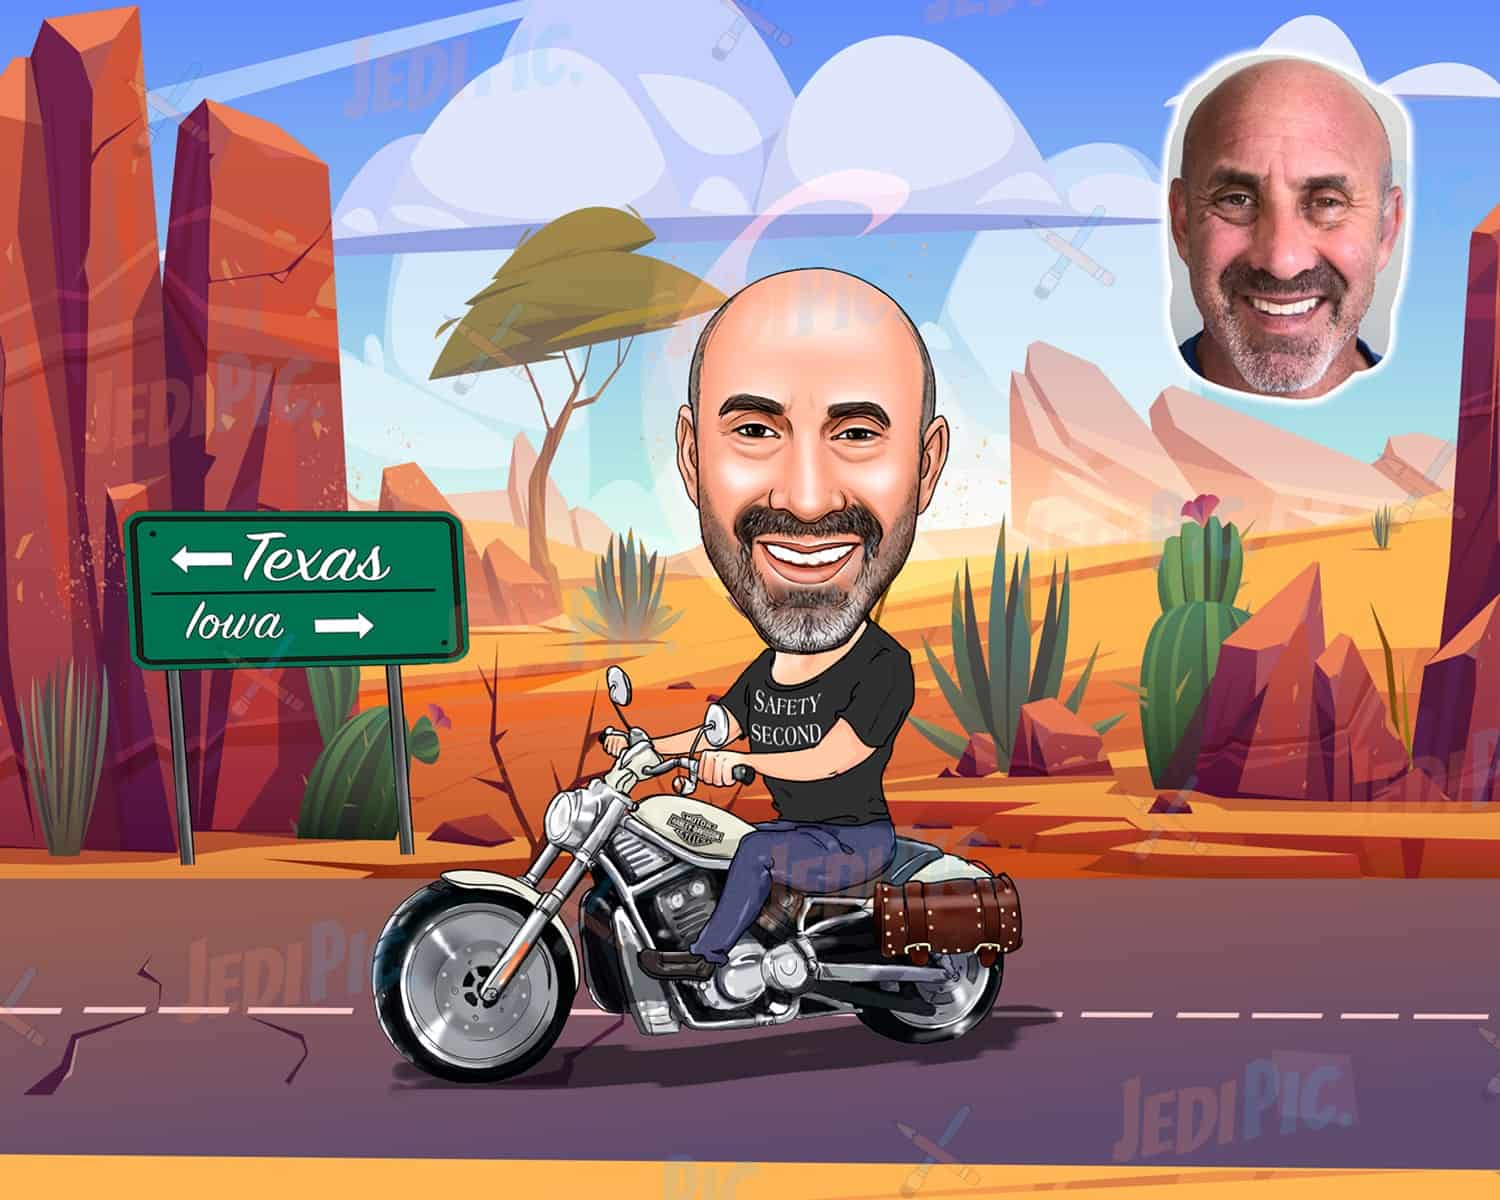 Motorcycle Rider Cartoon Caricature from Photo with Custom Background